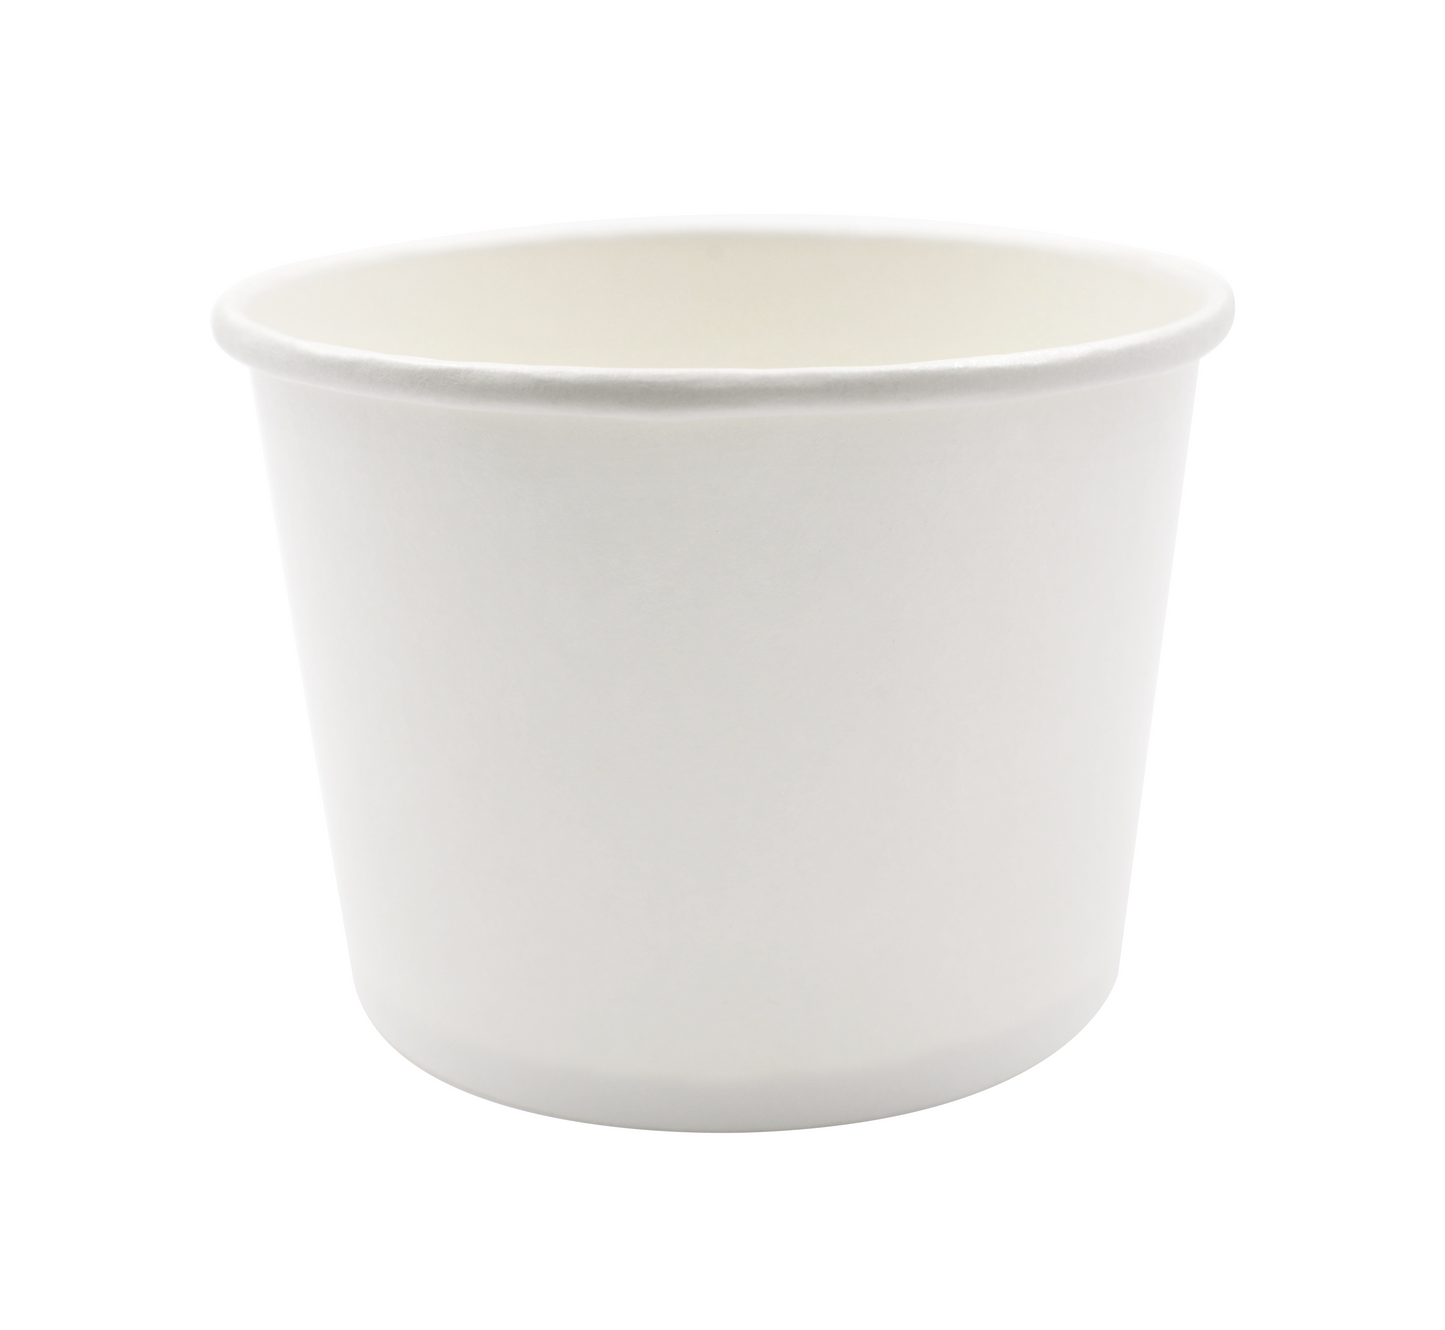 120-002-008 White Paper Soup/Food Container 8oz.